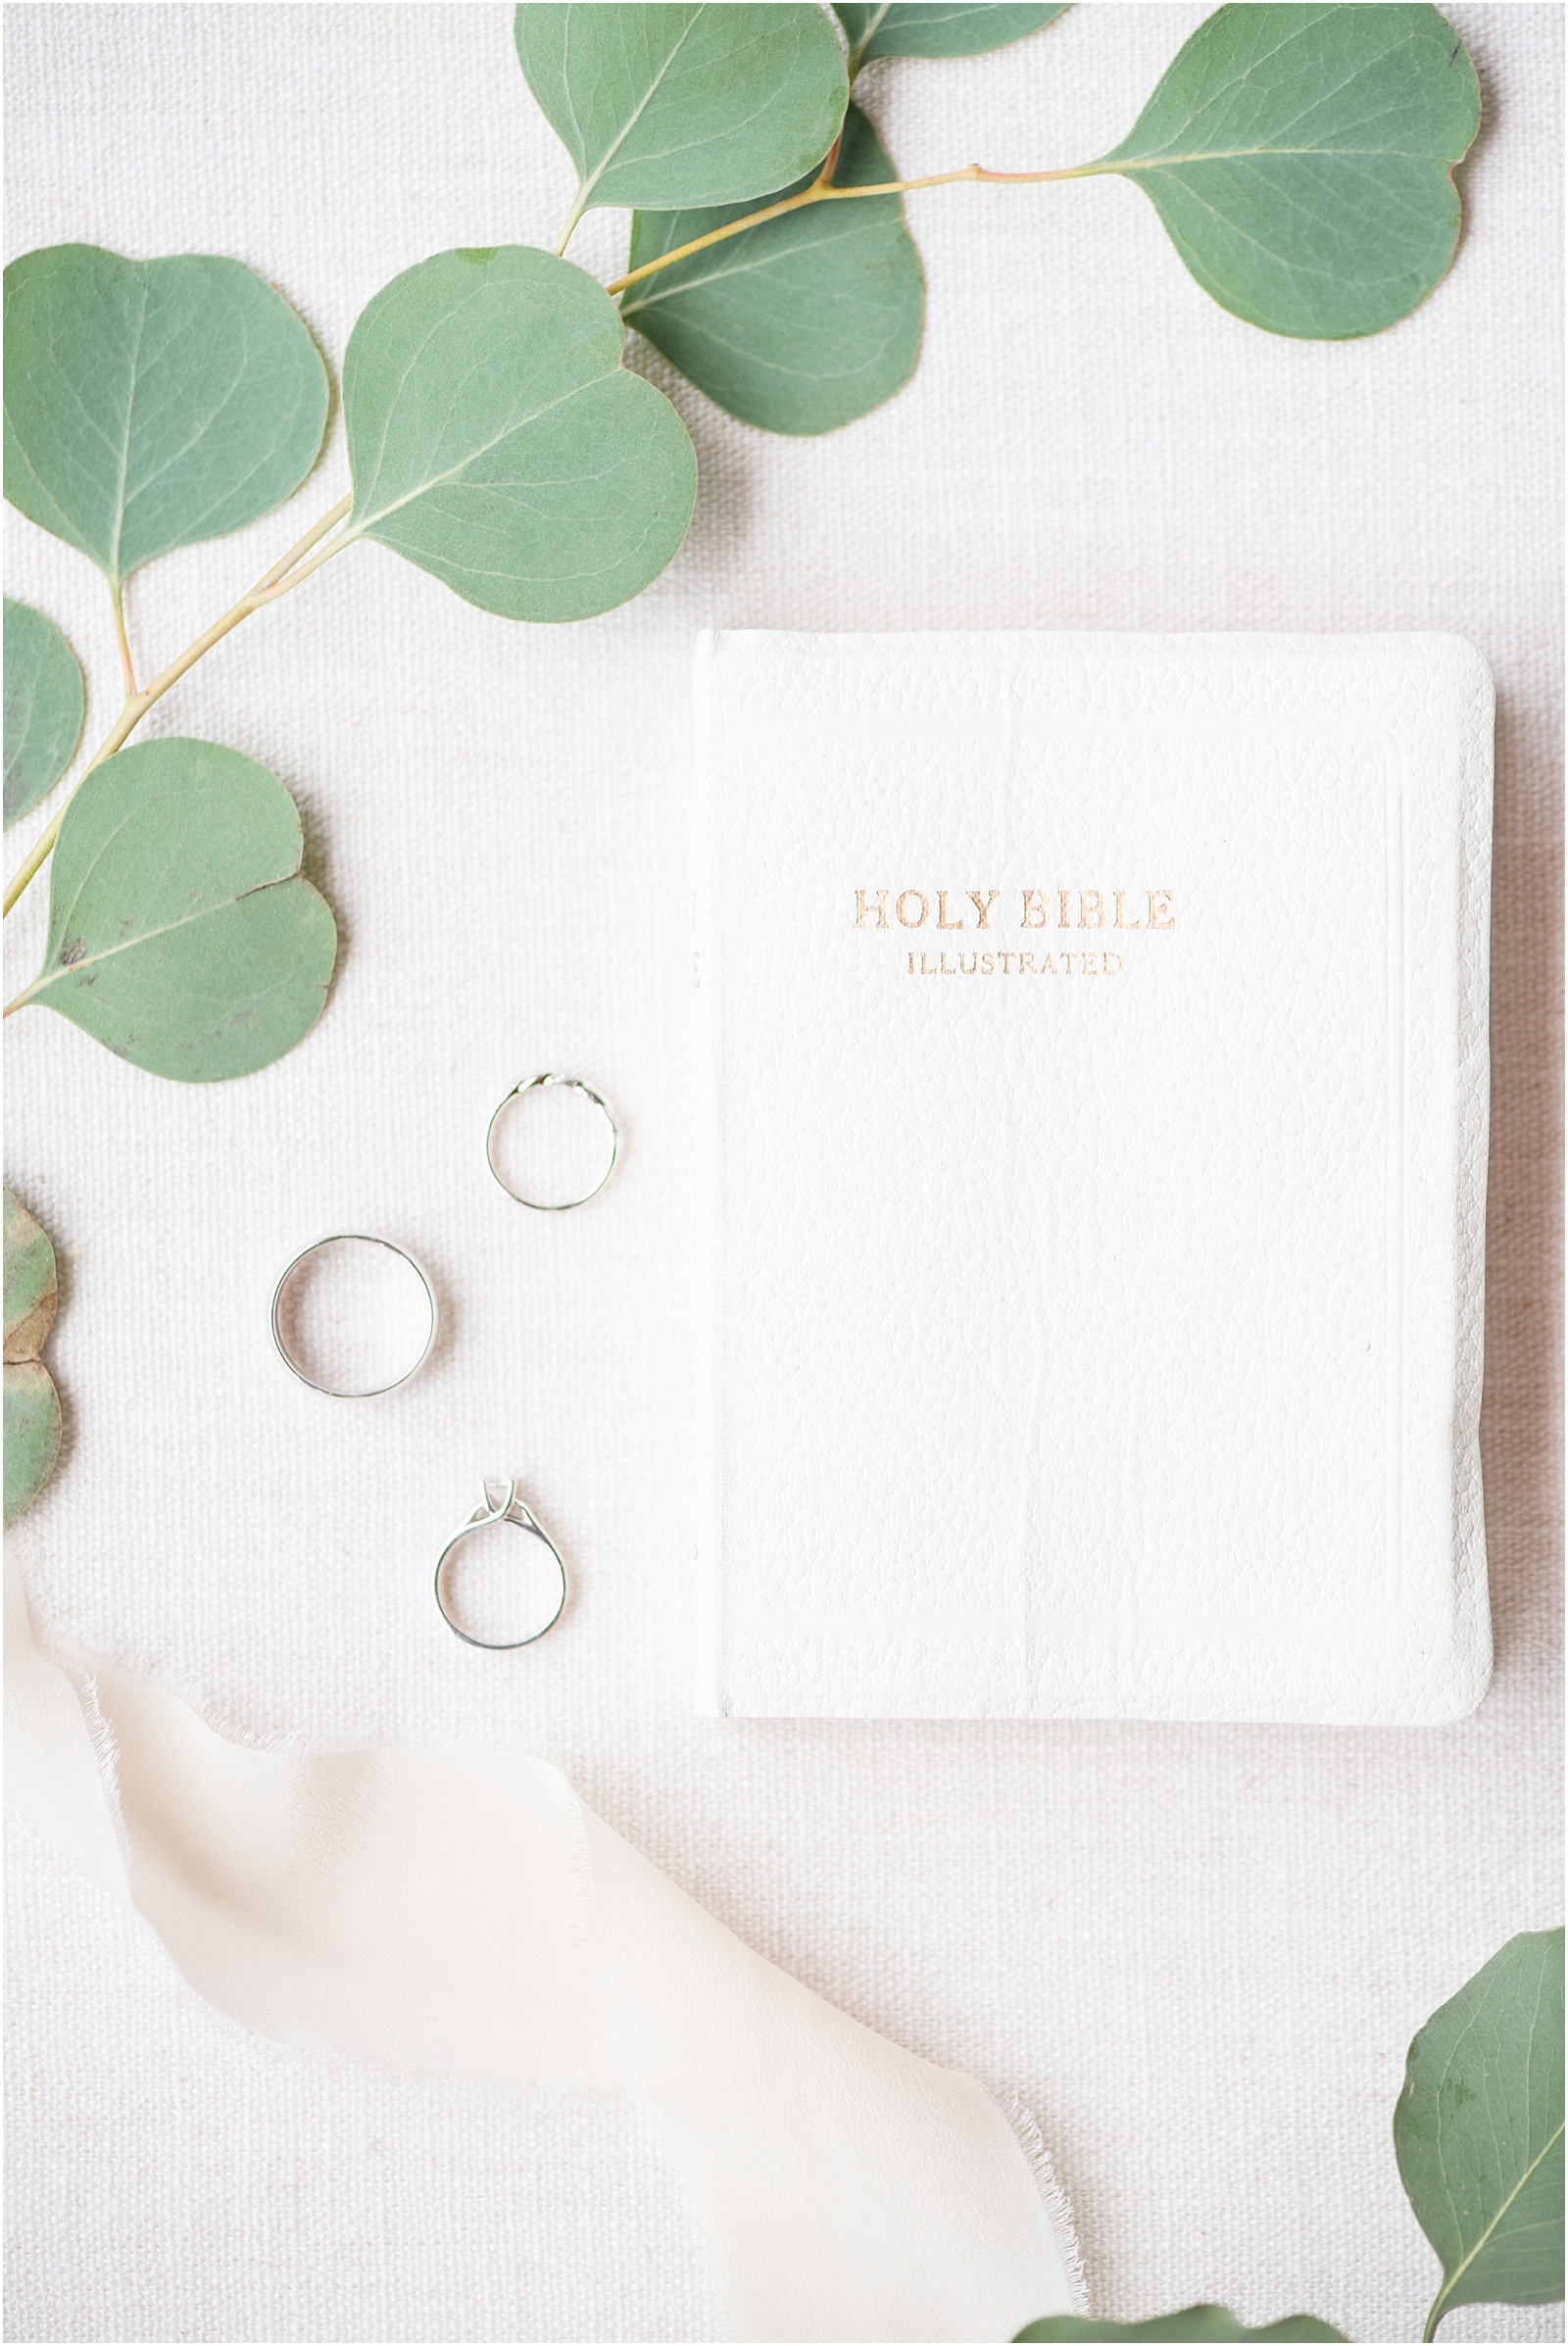 wedding rings laying on a ivory background with green leaves with a holy bible